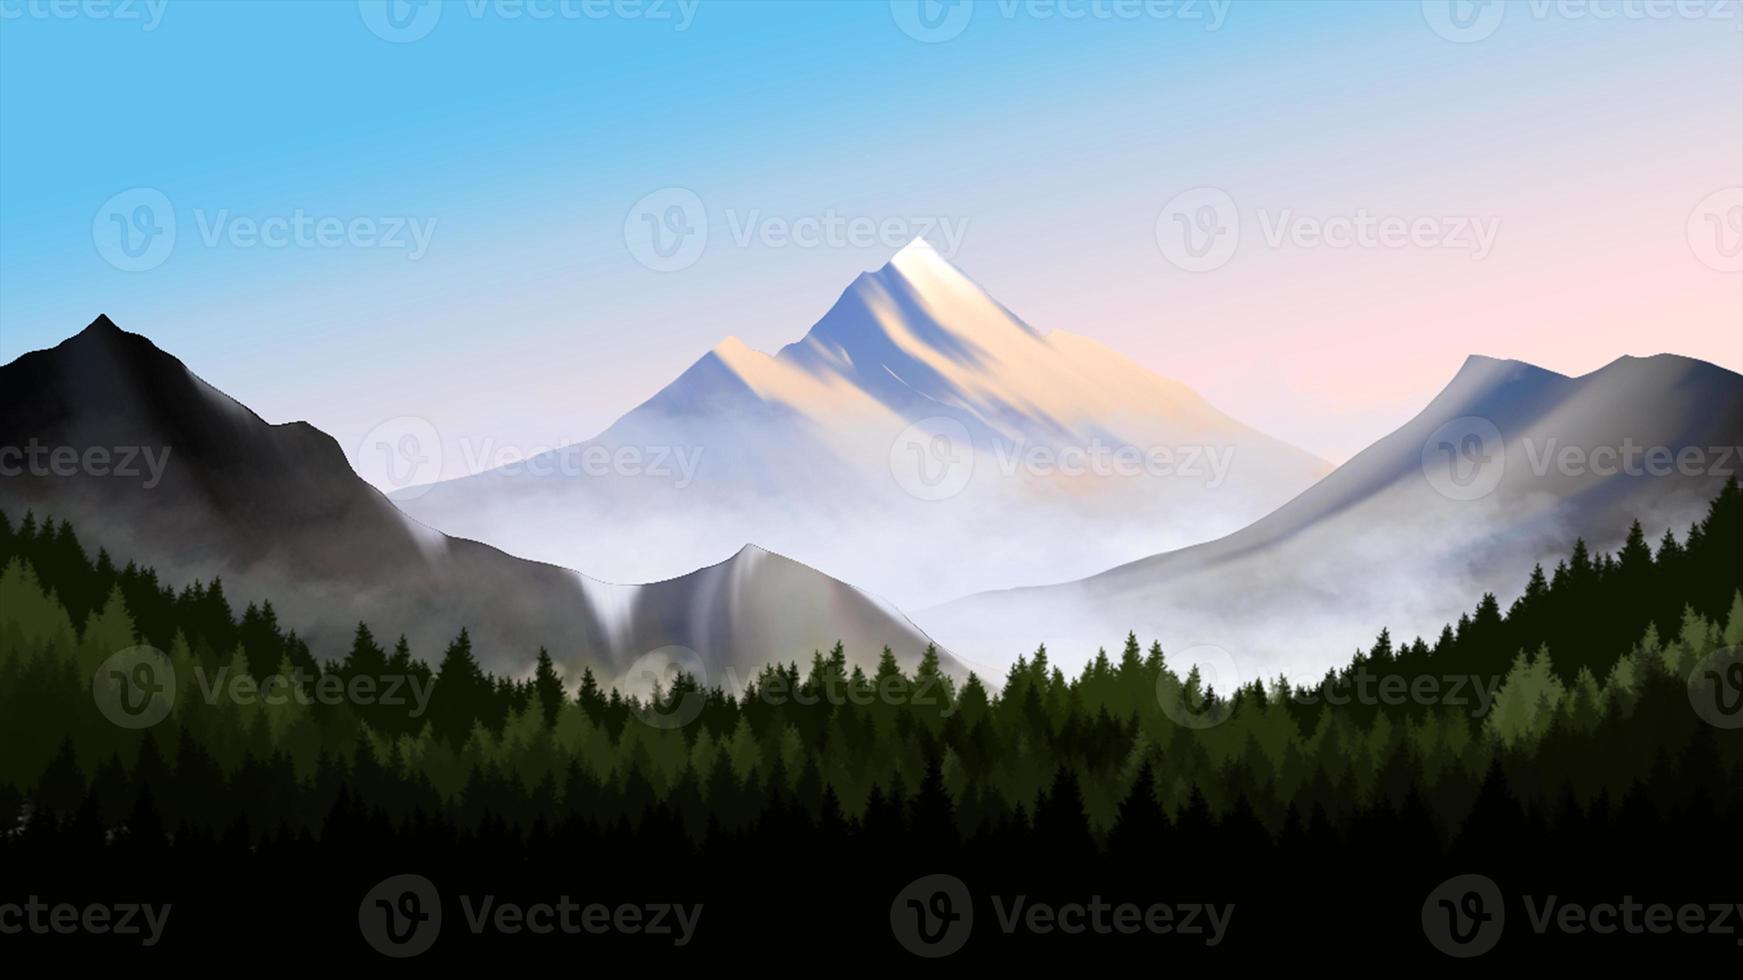 Mountain peaks landscape illustration with pine forest photo